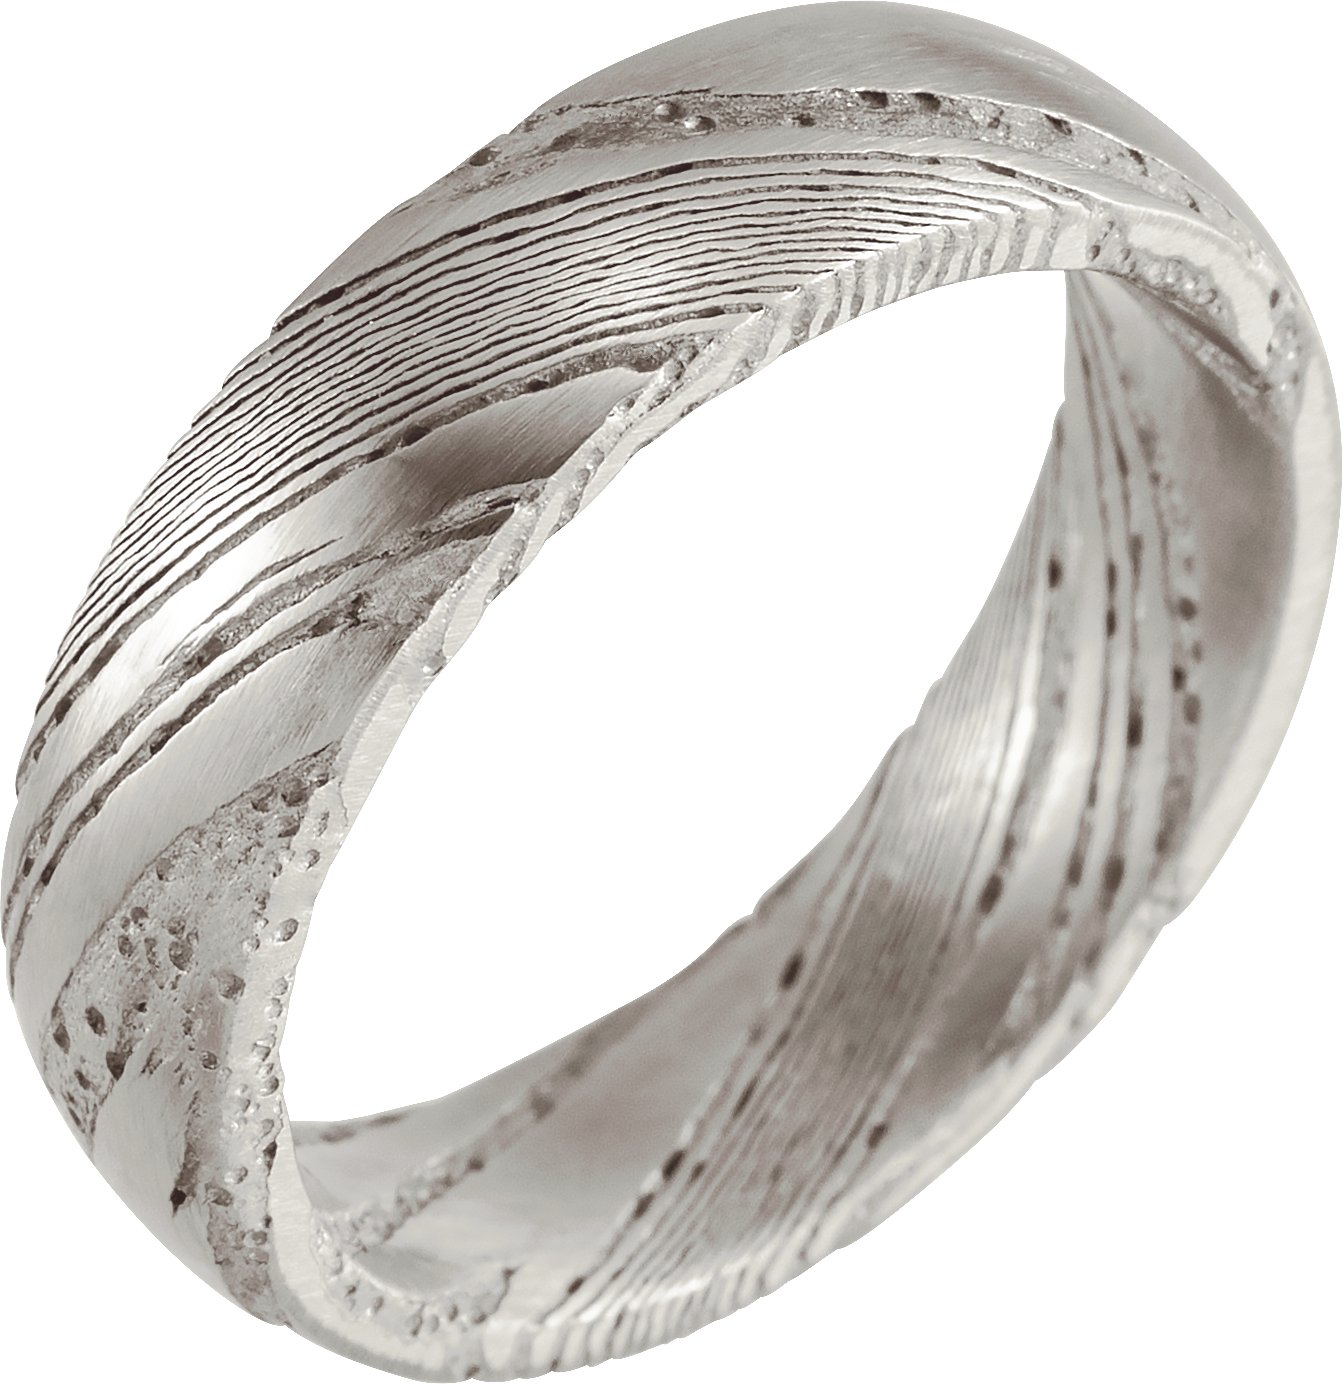 Damascus Steel Bands